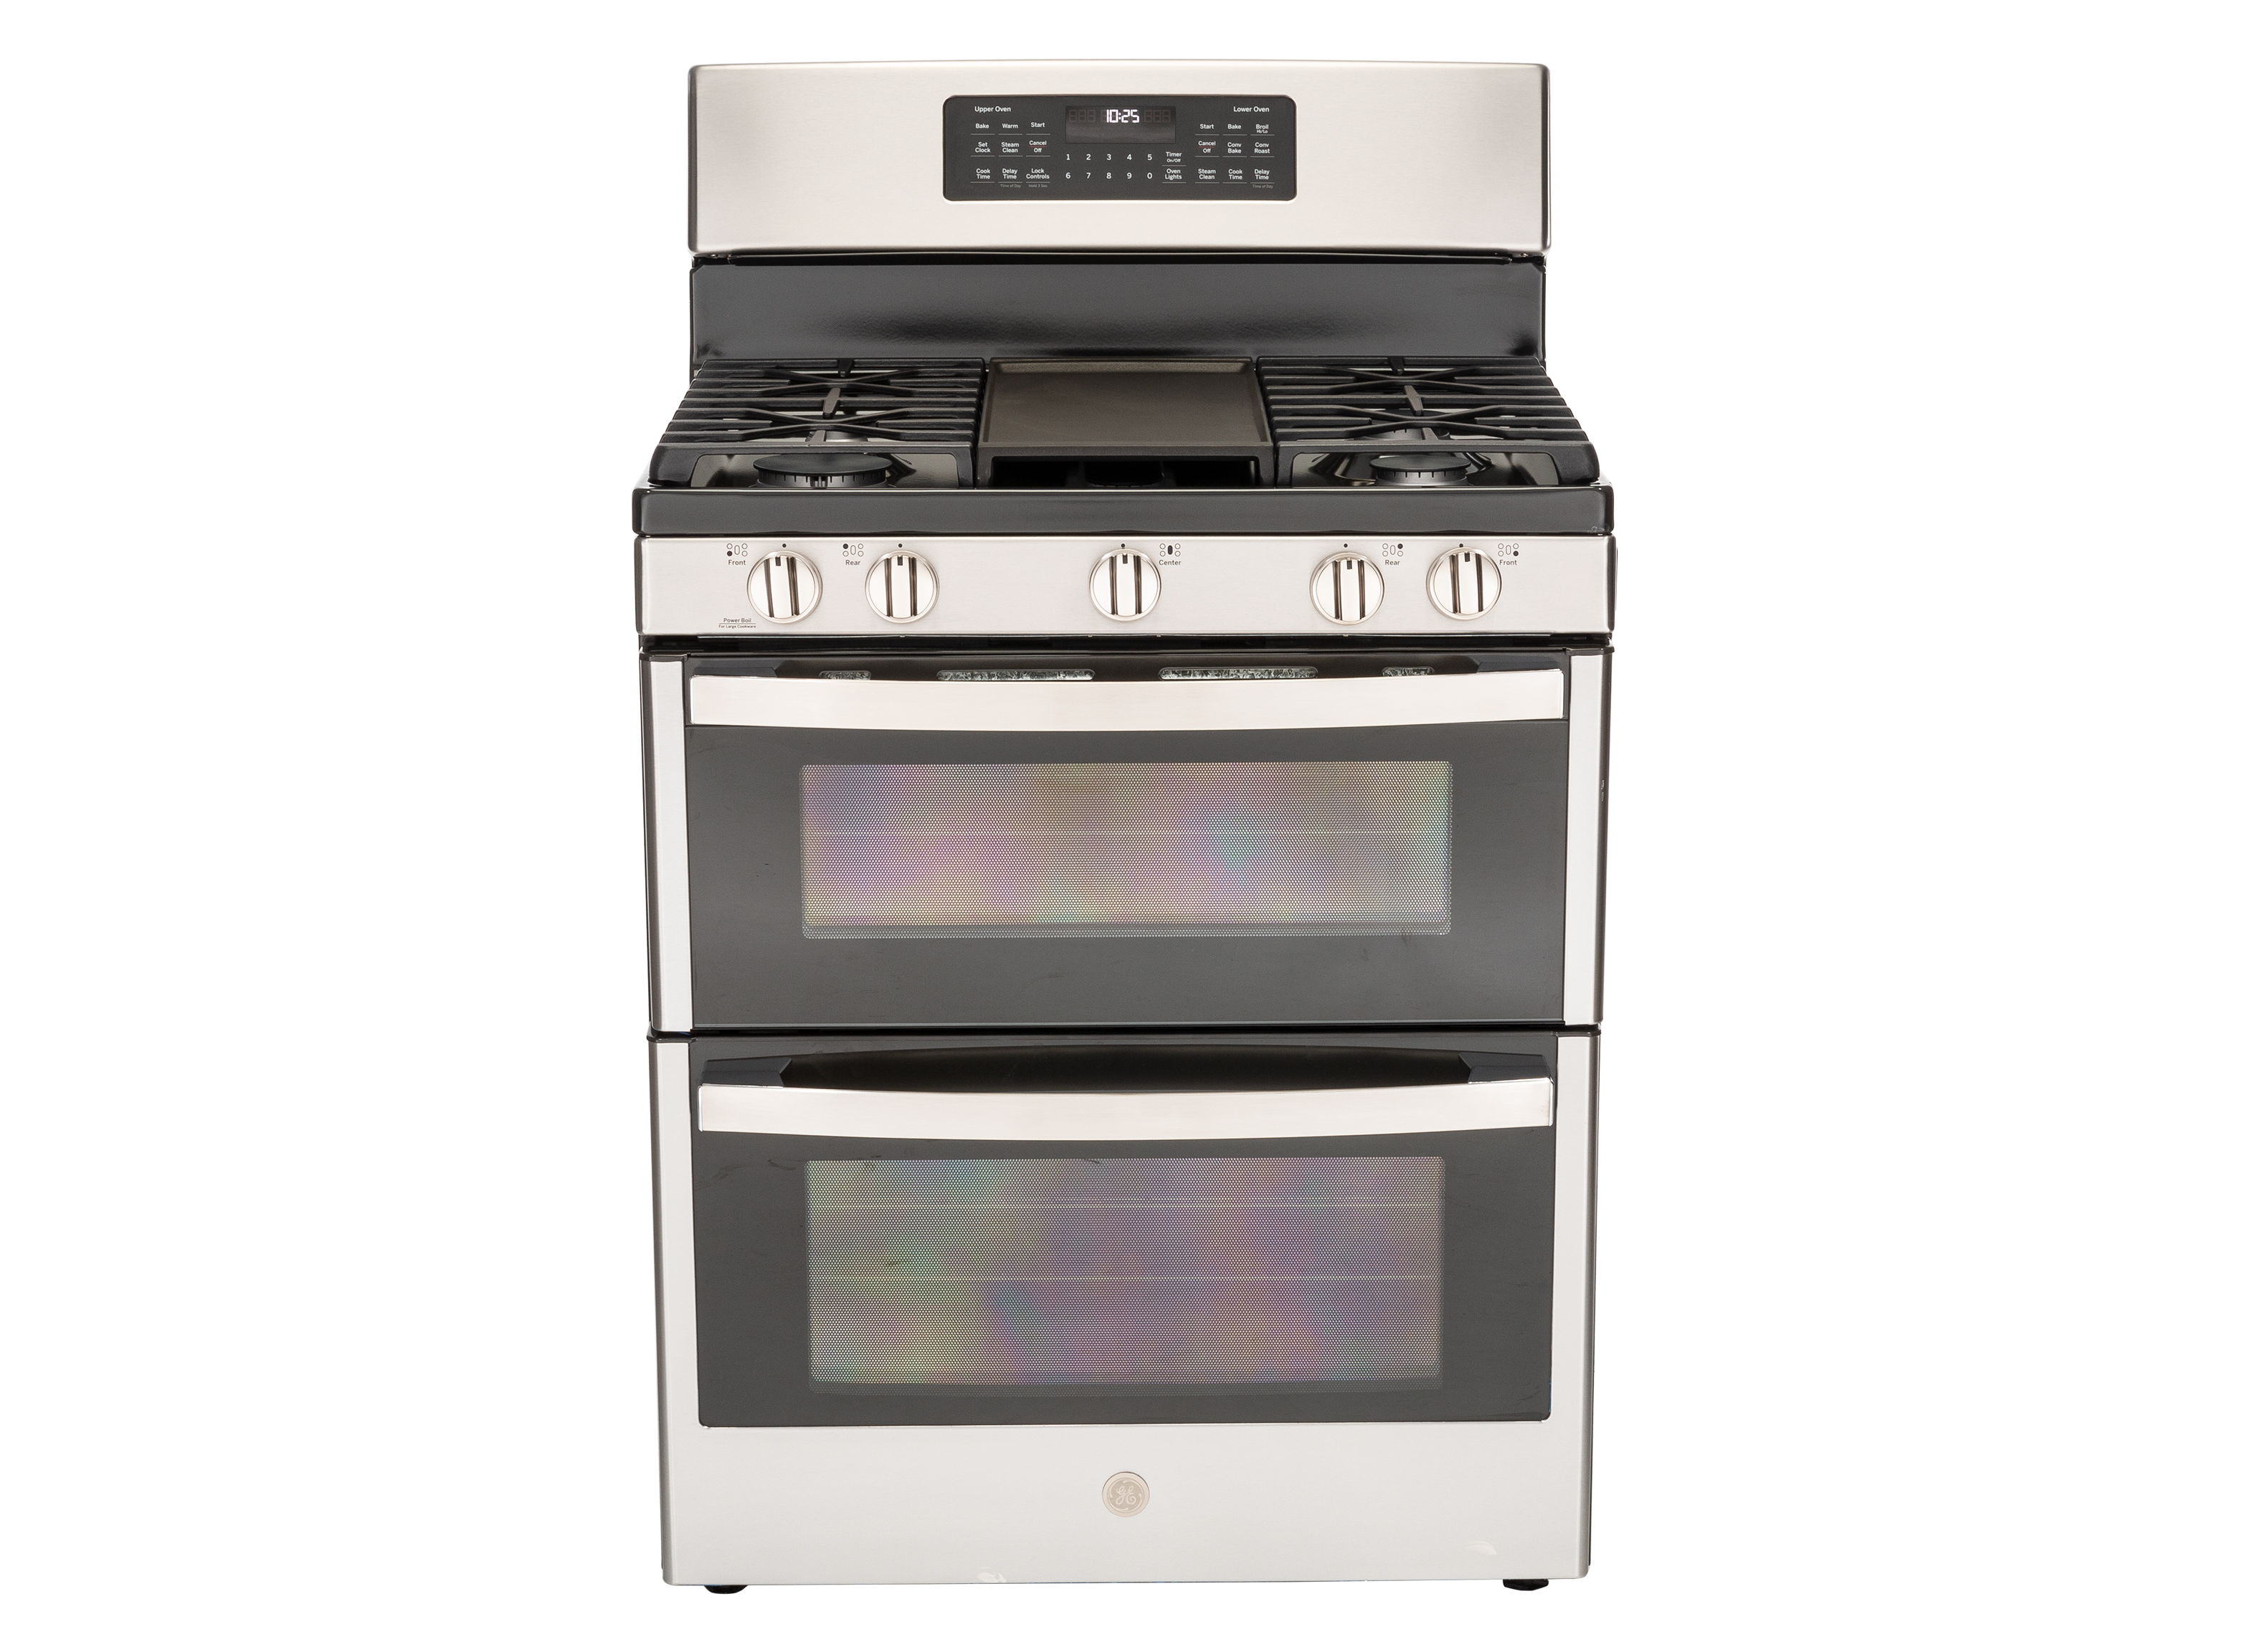 GE Profile PGB965YPFS 30 inch Stainless Steel GAS Convection Double Oven Freestanding Range